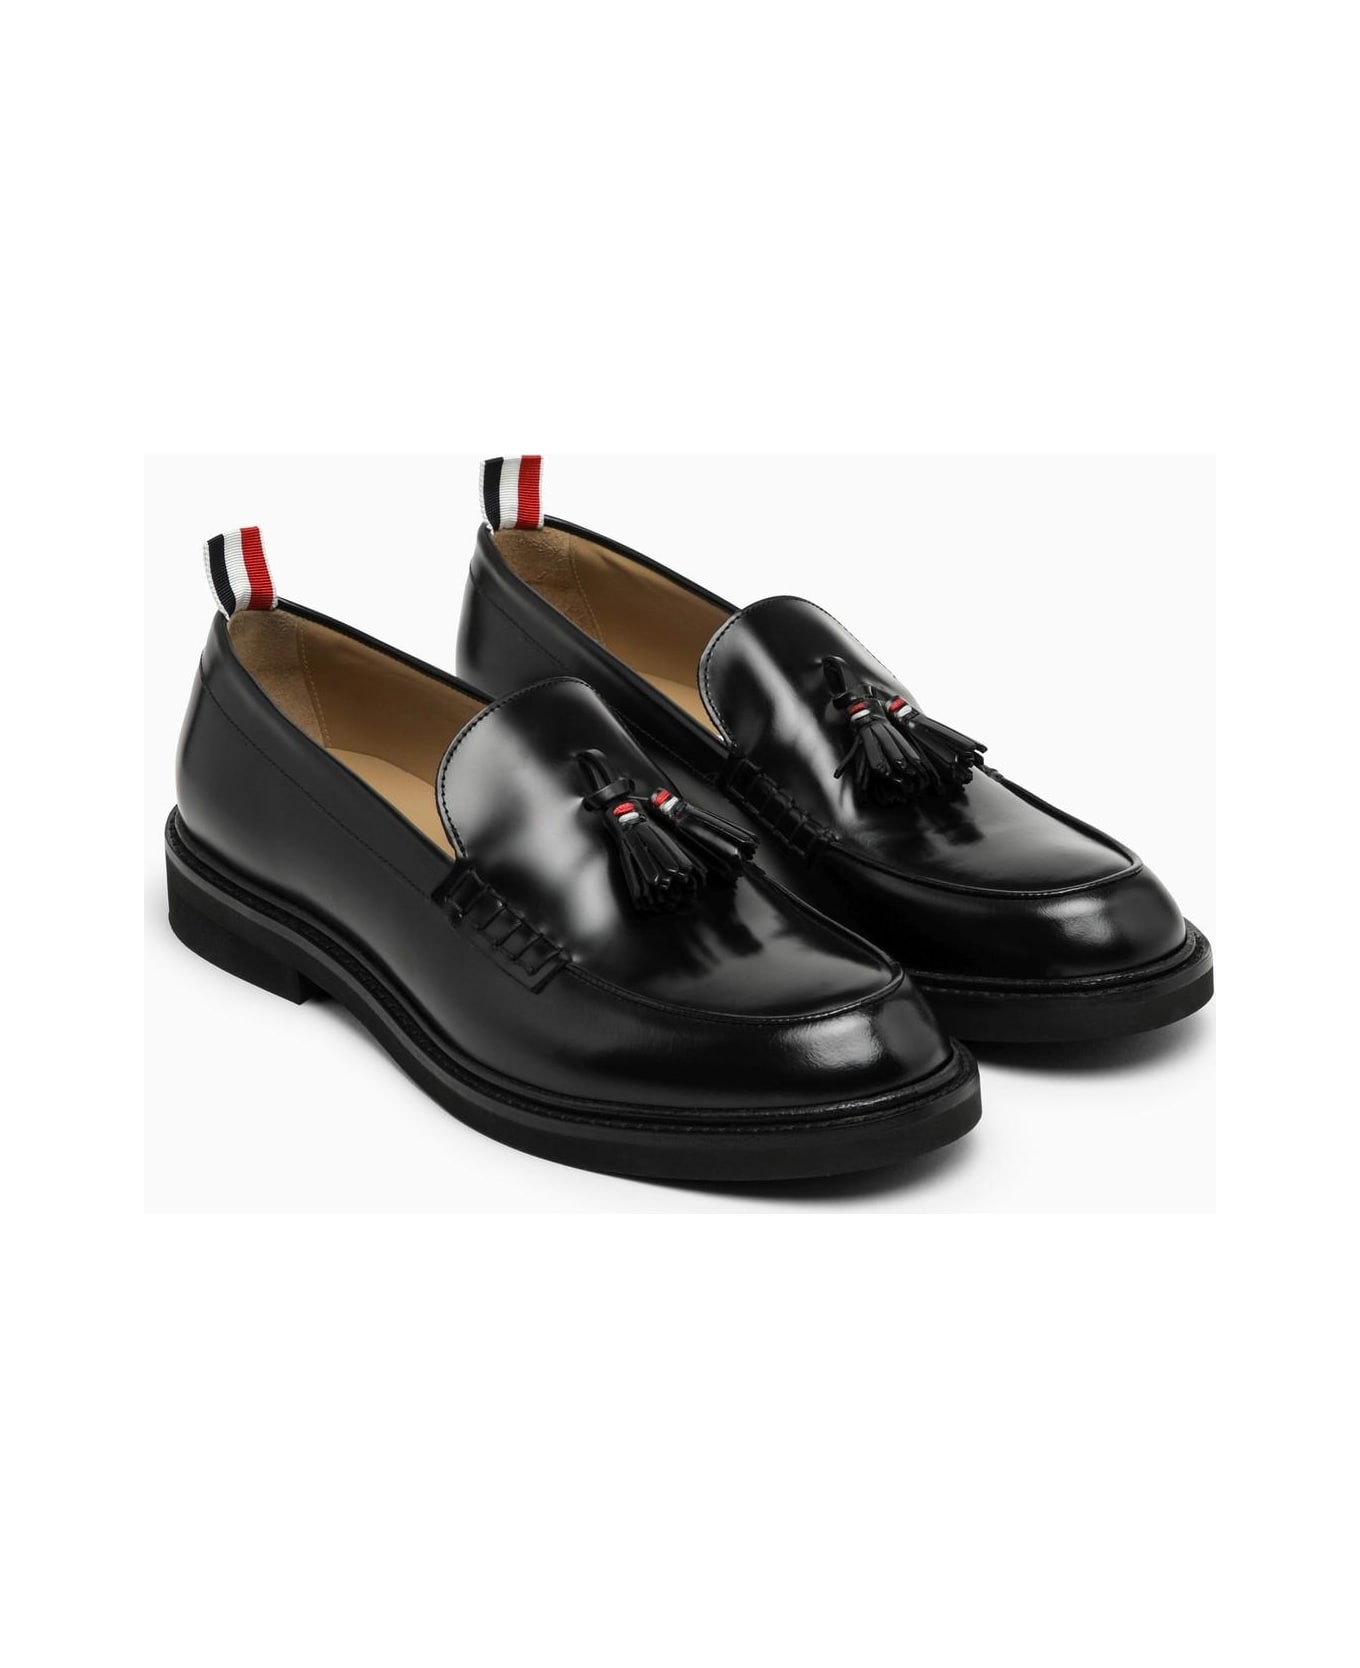 Thom Browne Black Leather Moccasin With Tassels